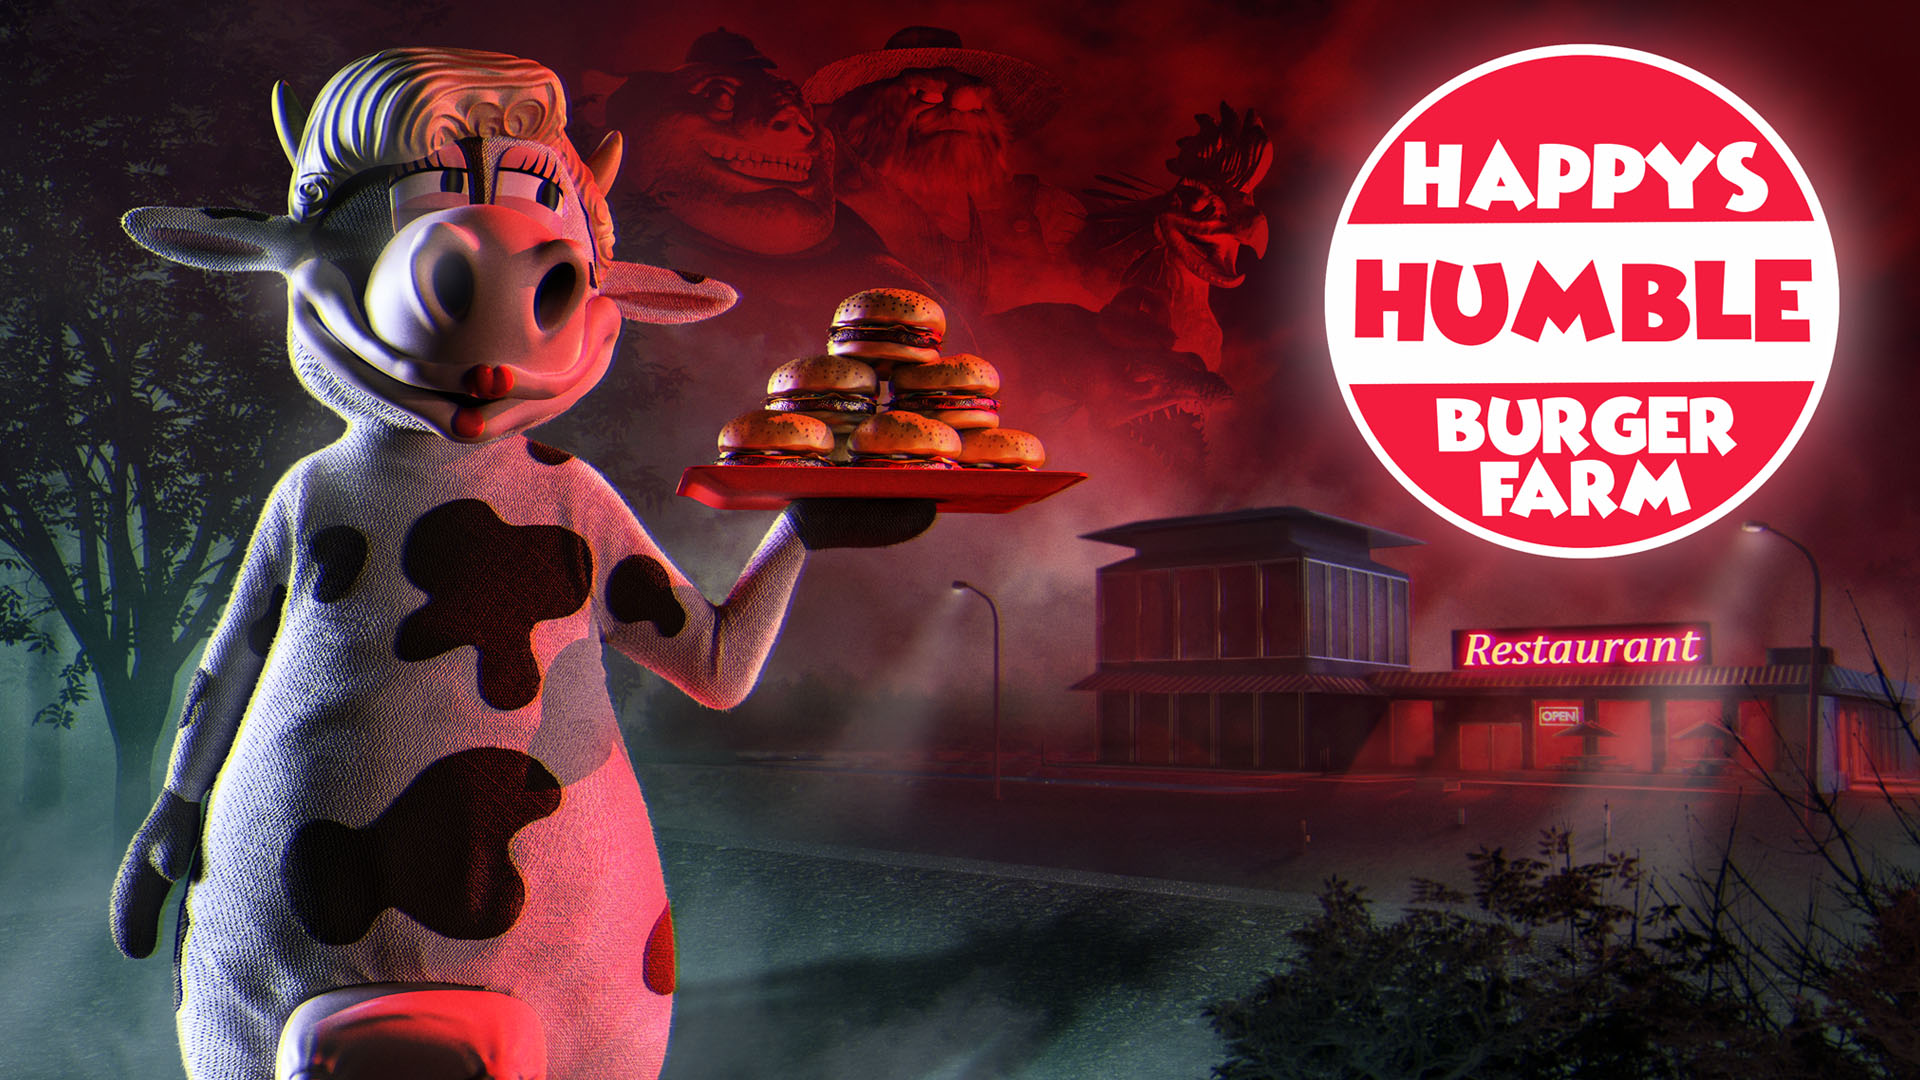 Happy's Humble Burger Farm Launches in 2021